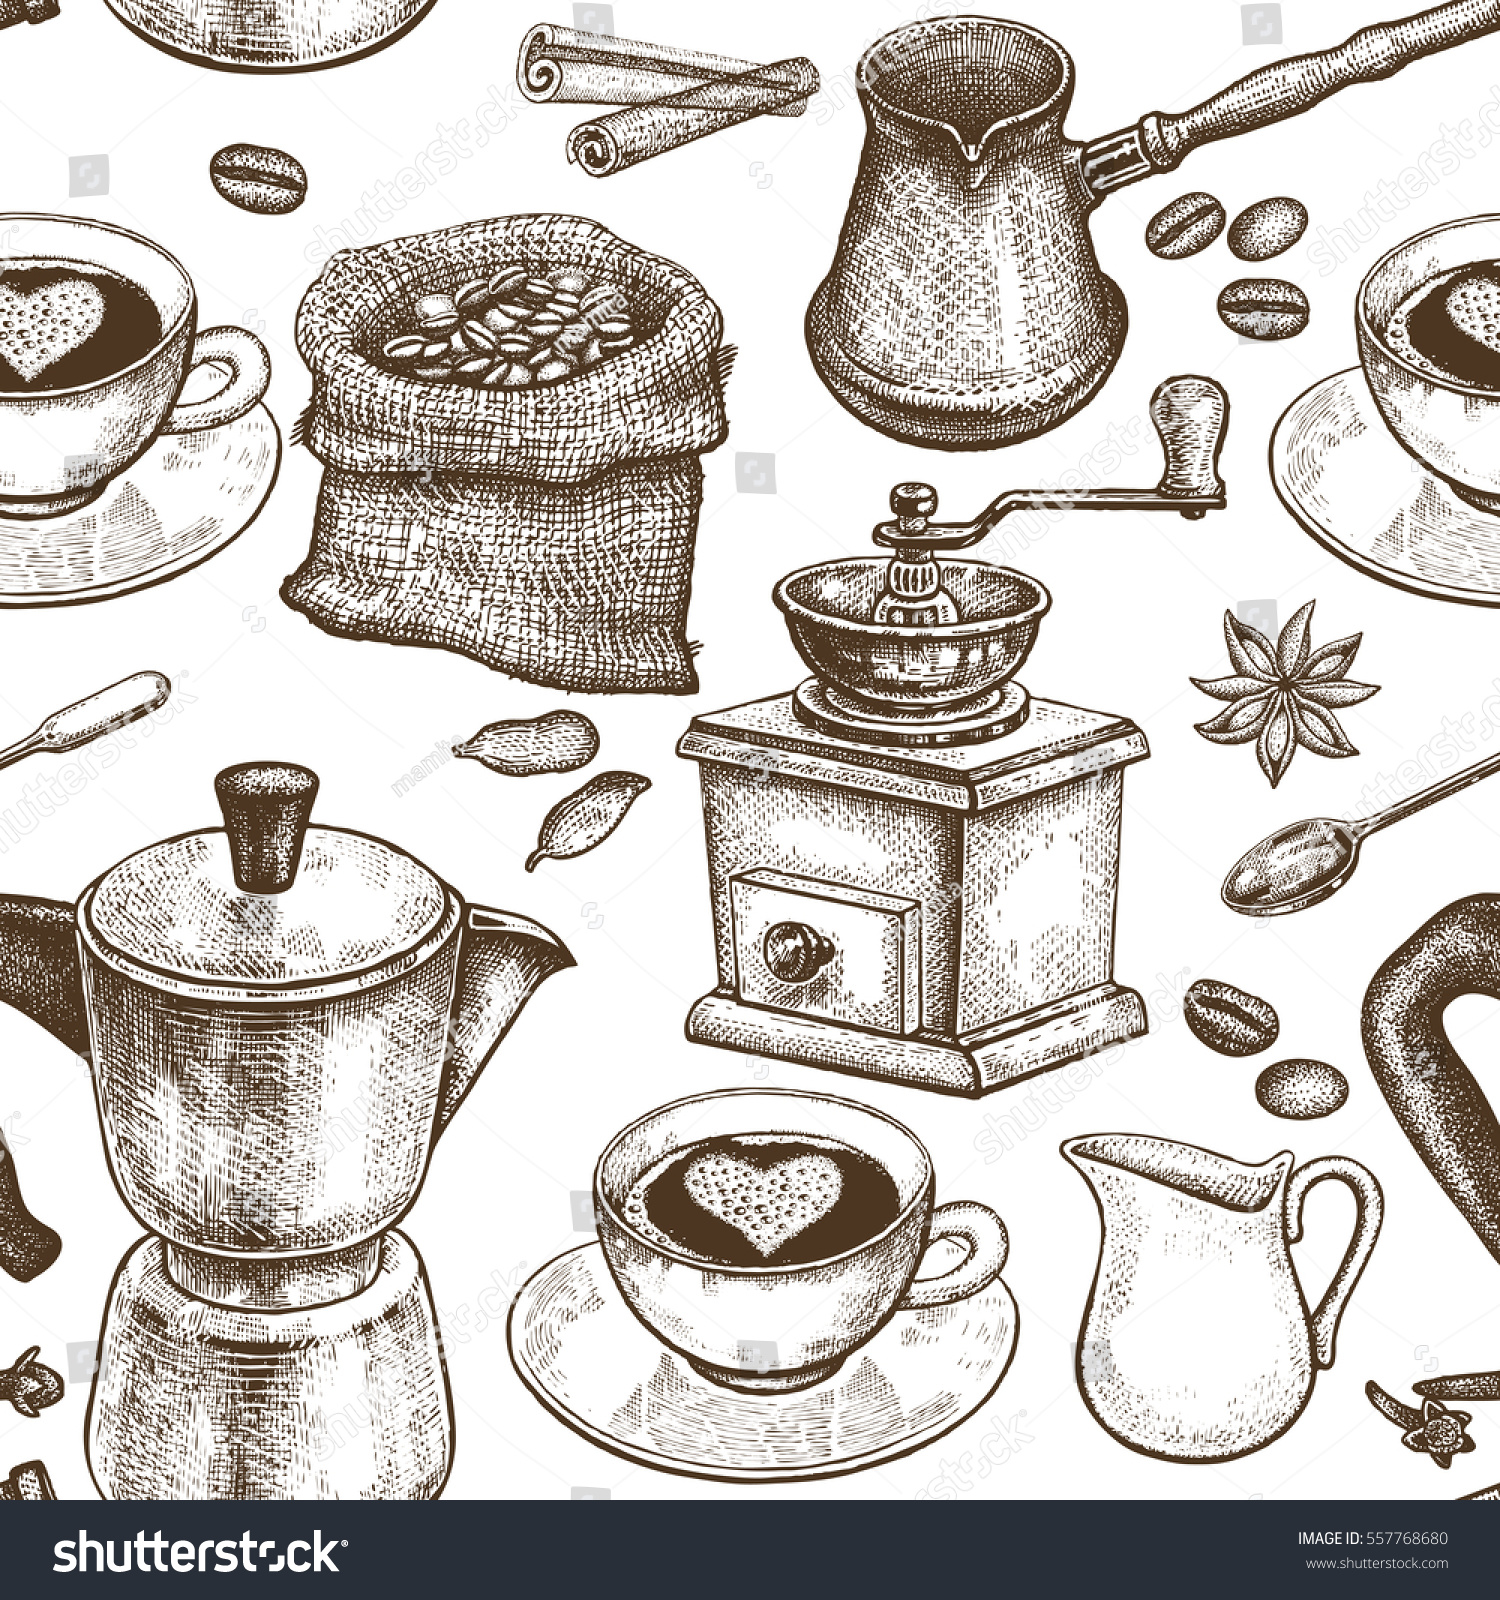 SVG of Coffee pot, coffee grinder, coffee cups, donuts, Turkish ibrik, jug of milk. Seamless vector pattern. Black and white art illustration. Vintage. Kitchen design for textiles, paper, packaging, wrapping svg